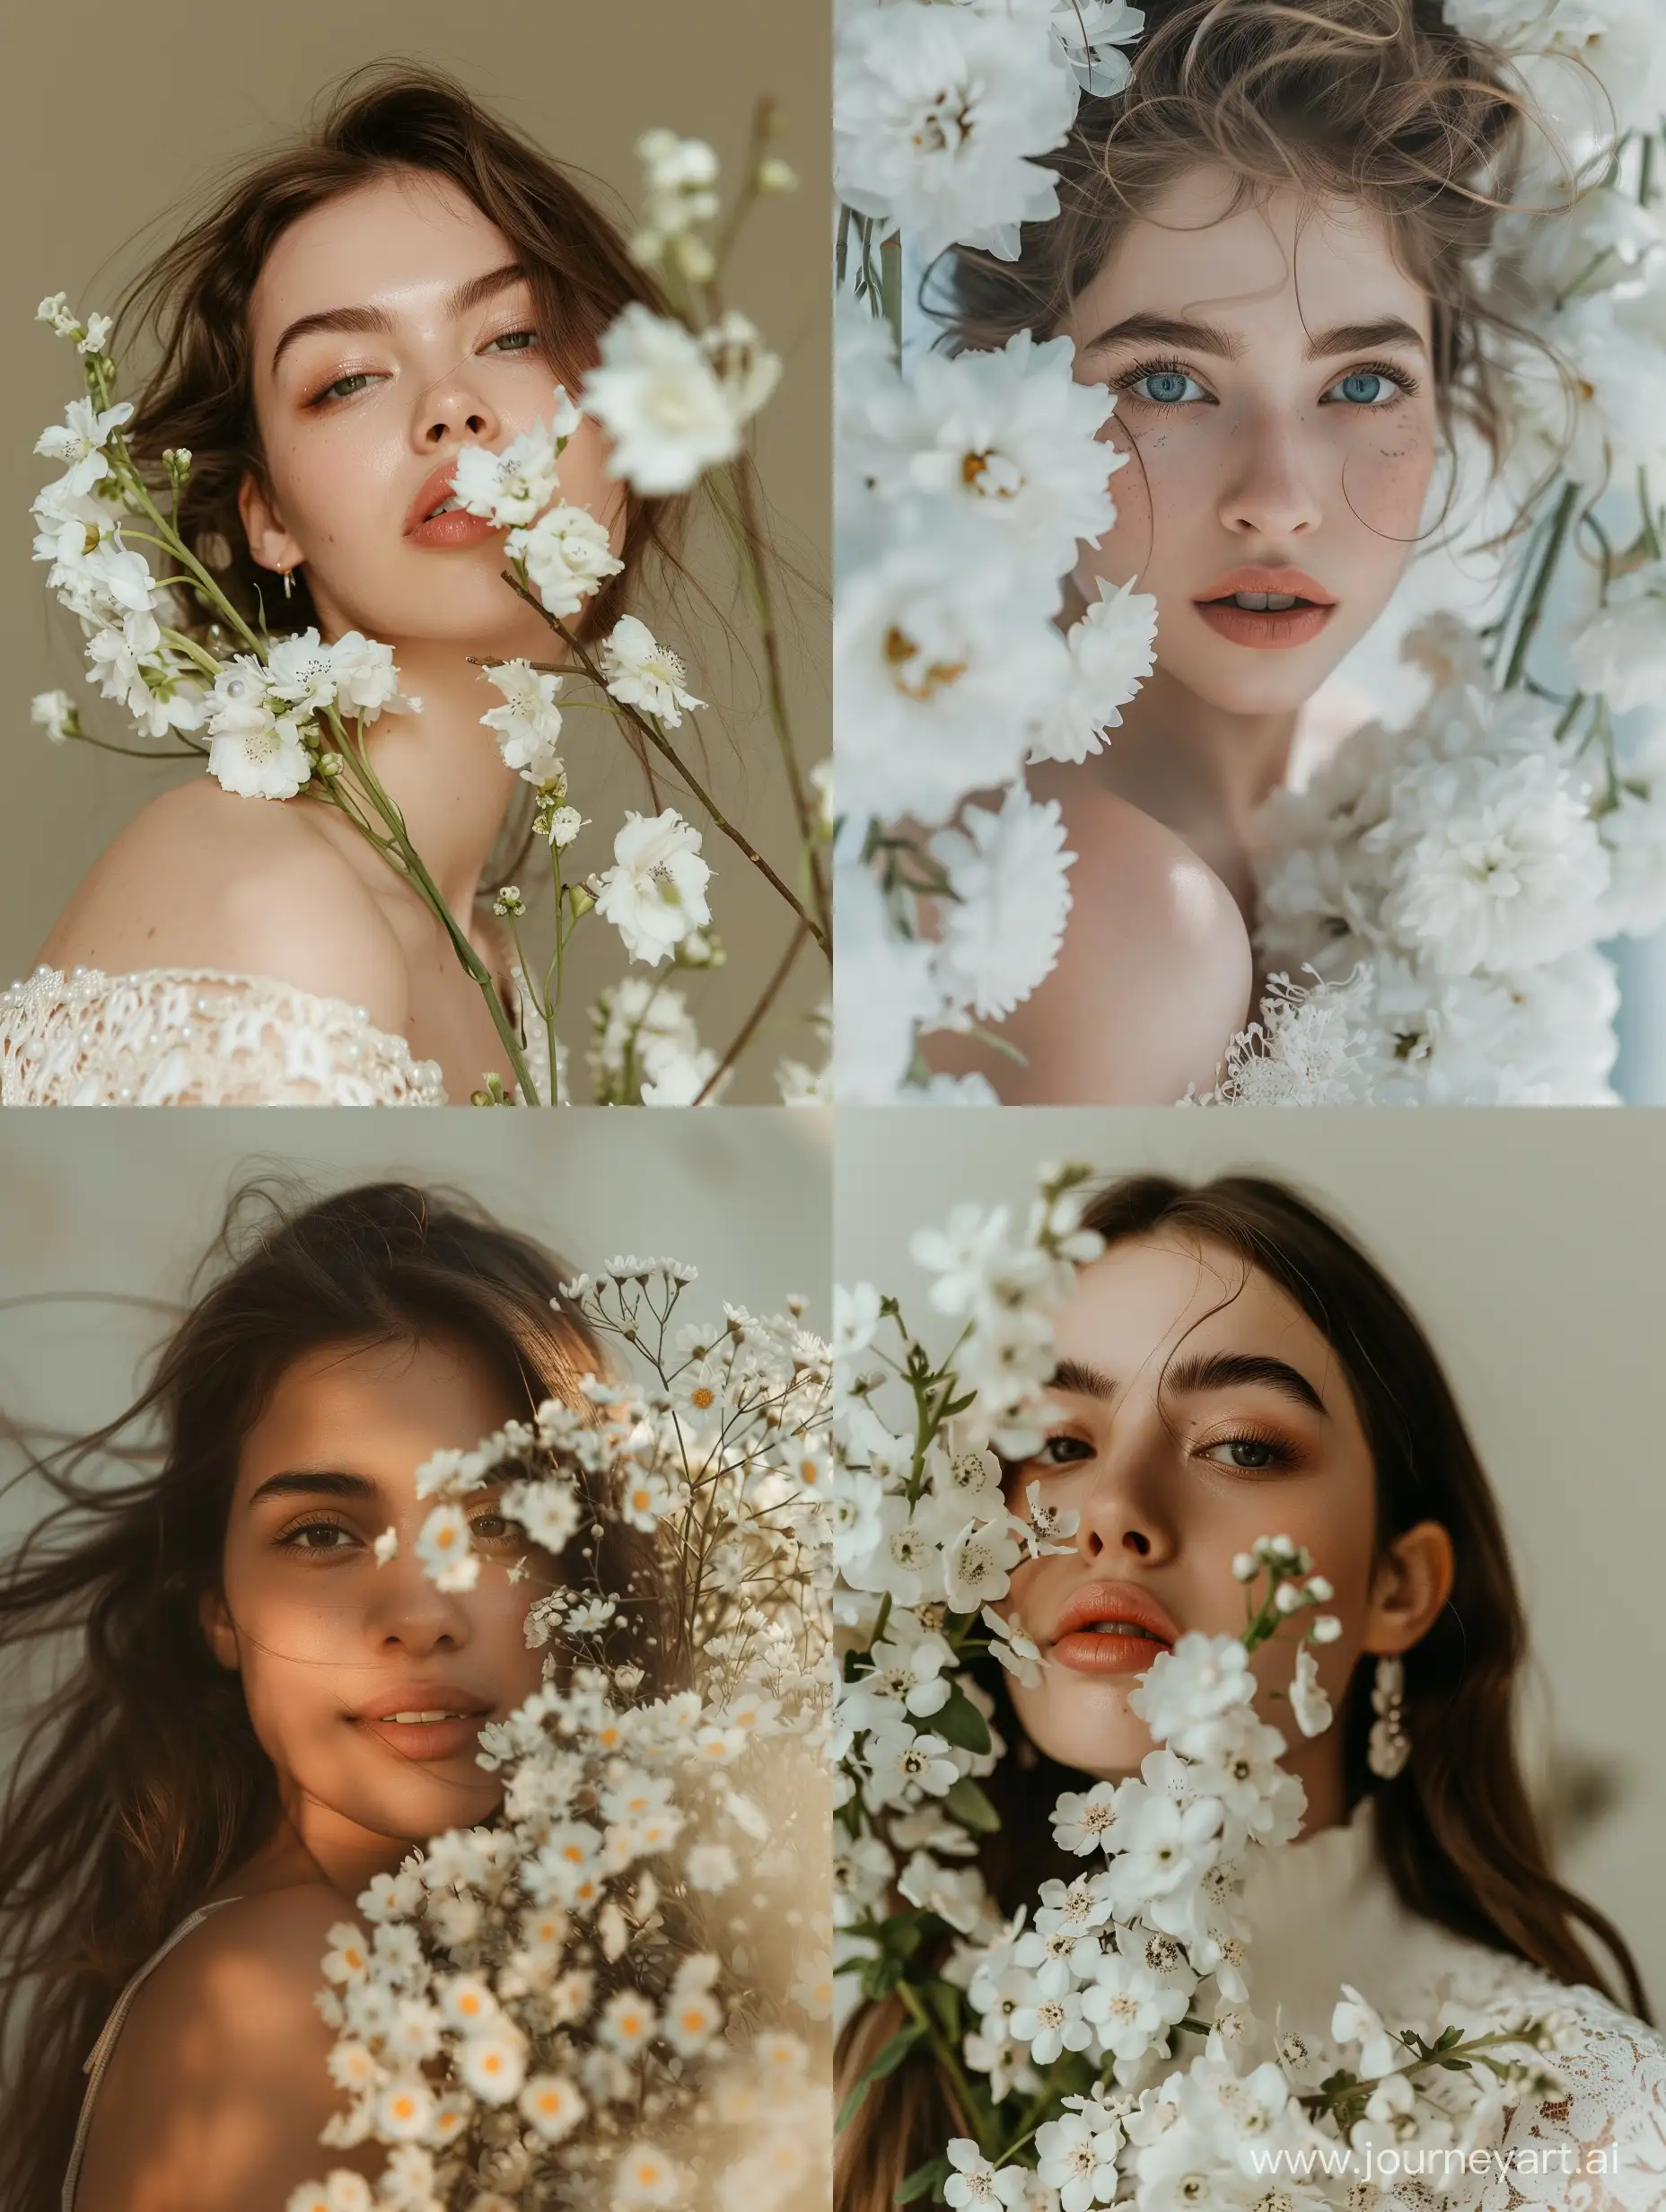 create a photo of woman with white flower bouqet